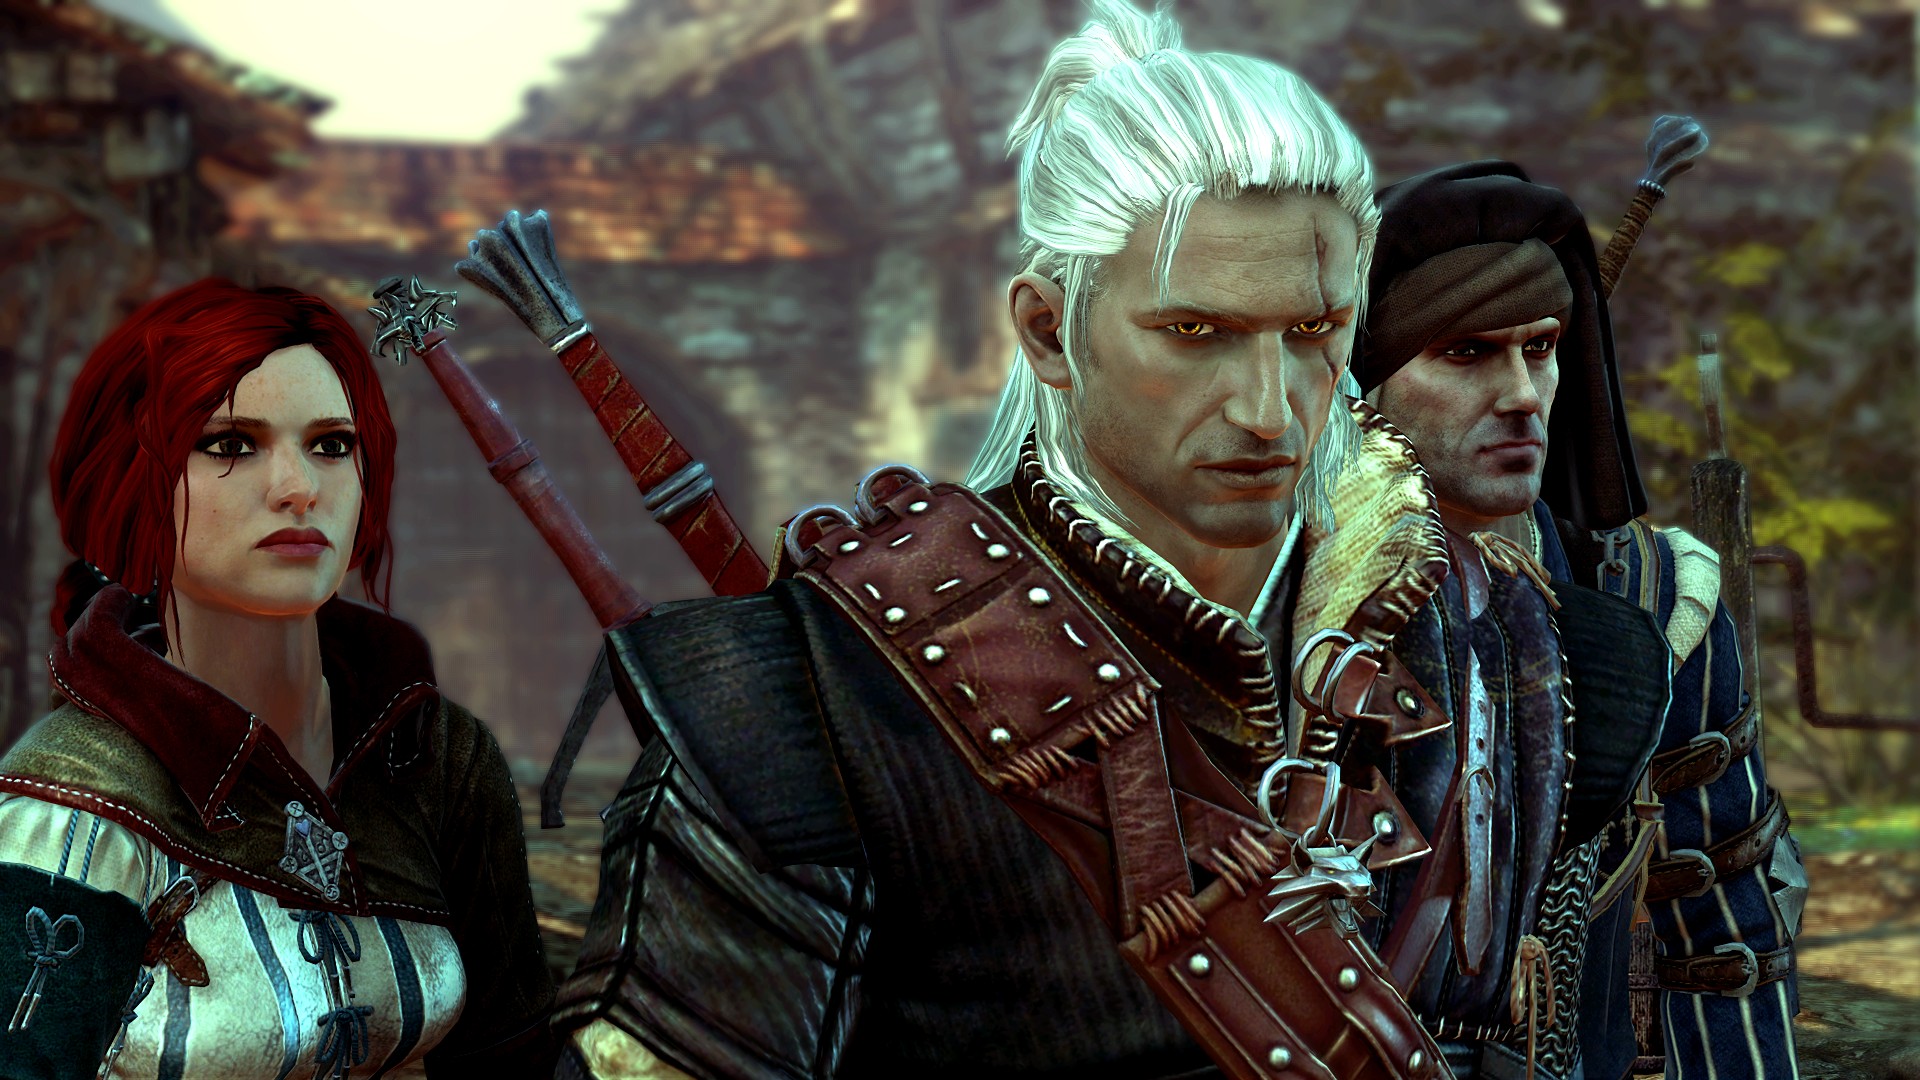 Prologue, The Balista - The Witcher 2 (Enhanced Edition) Gameplay